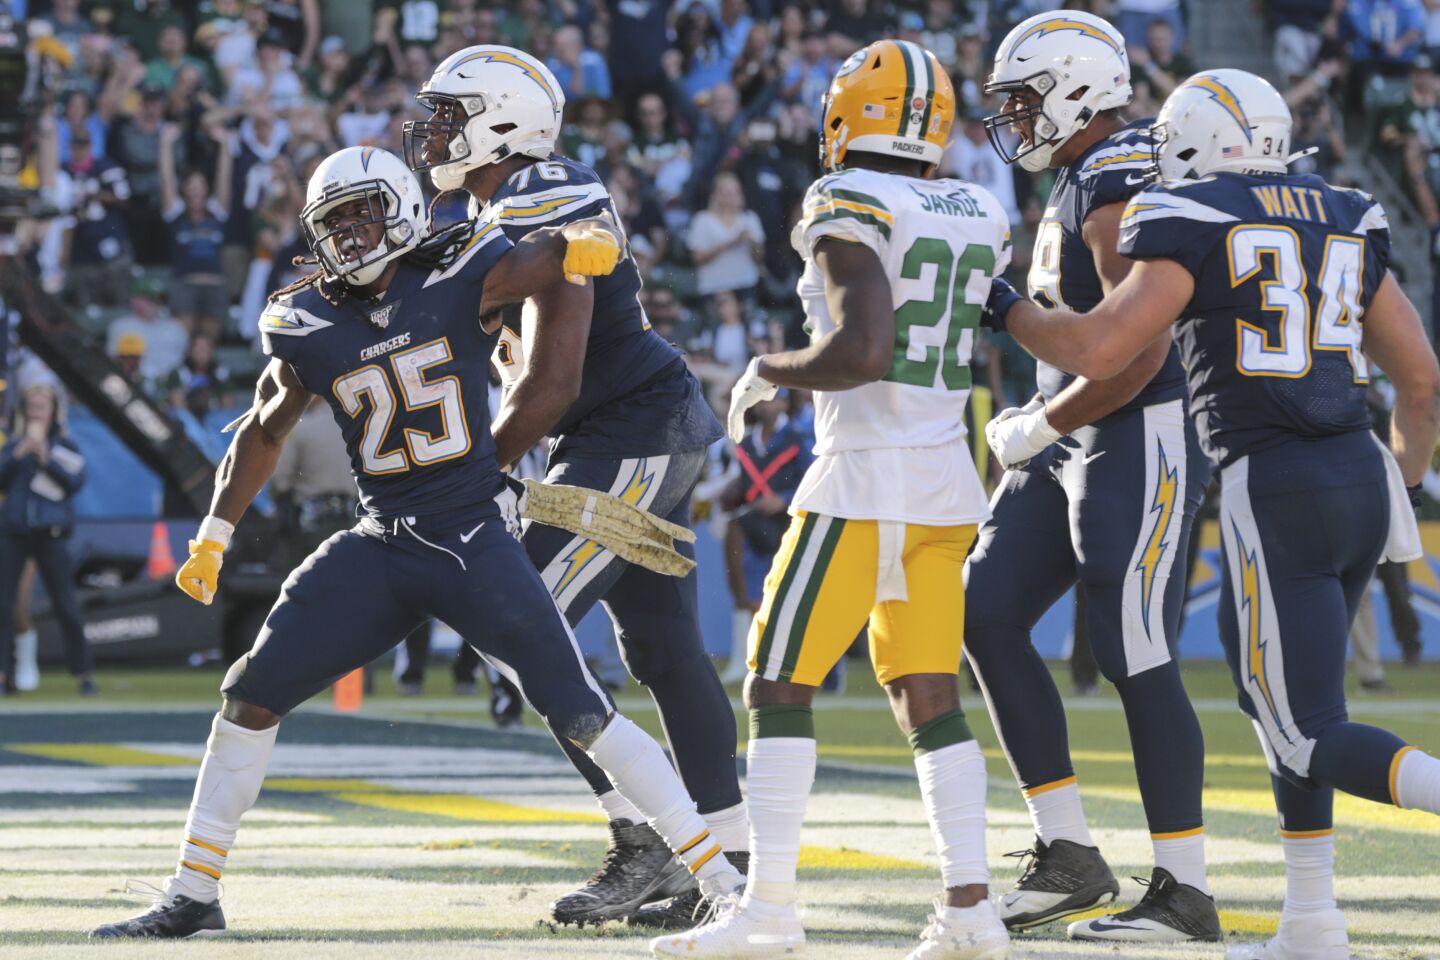 Chargers running back Melvin Gordon celebrates touchdown.